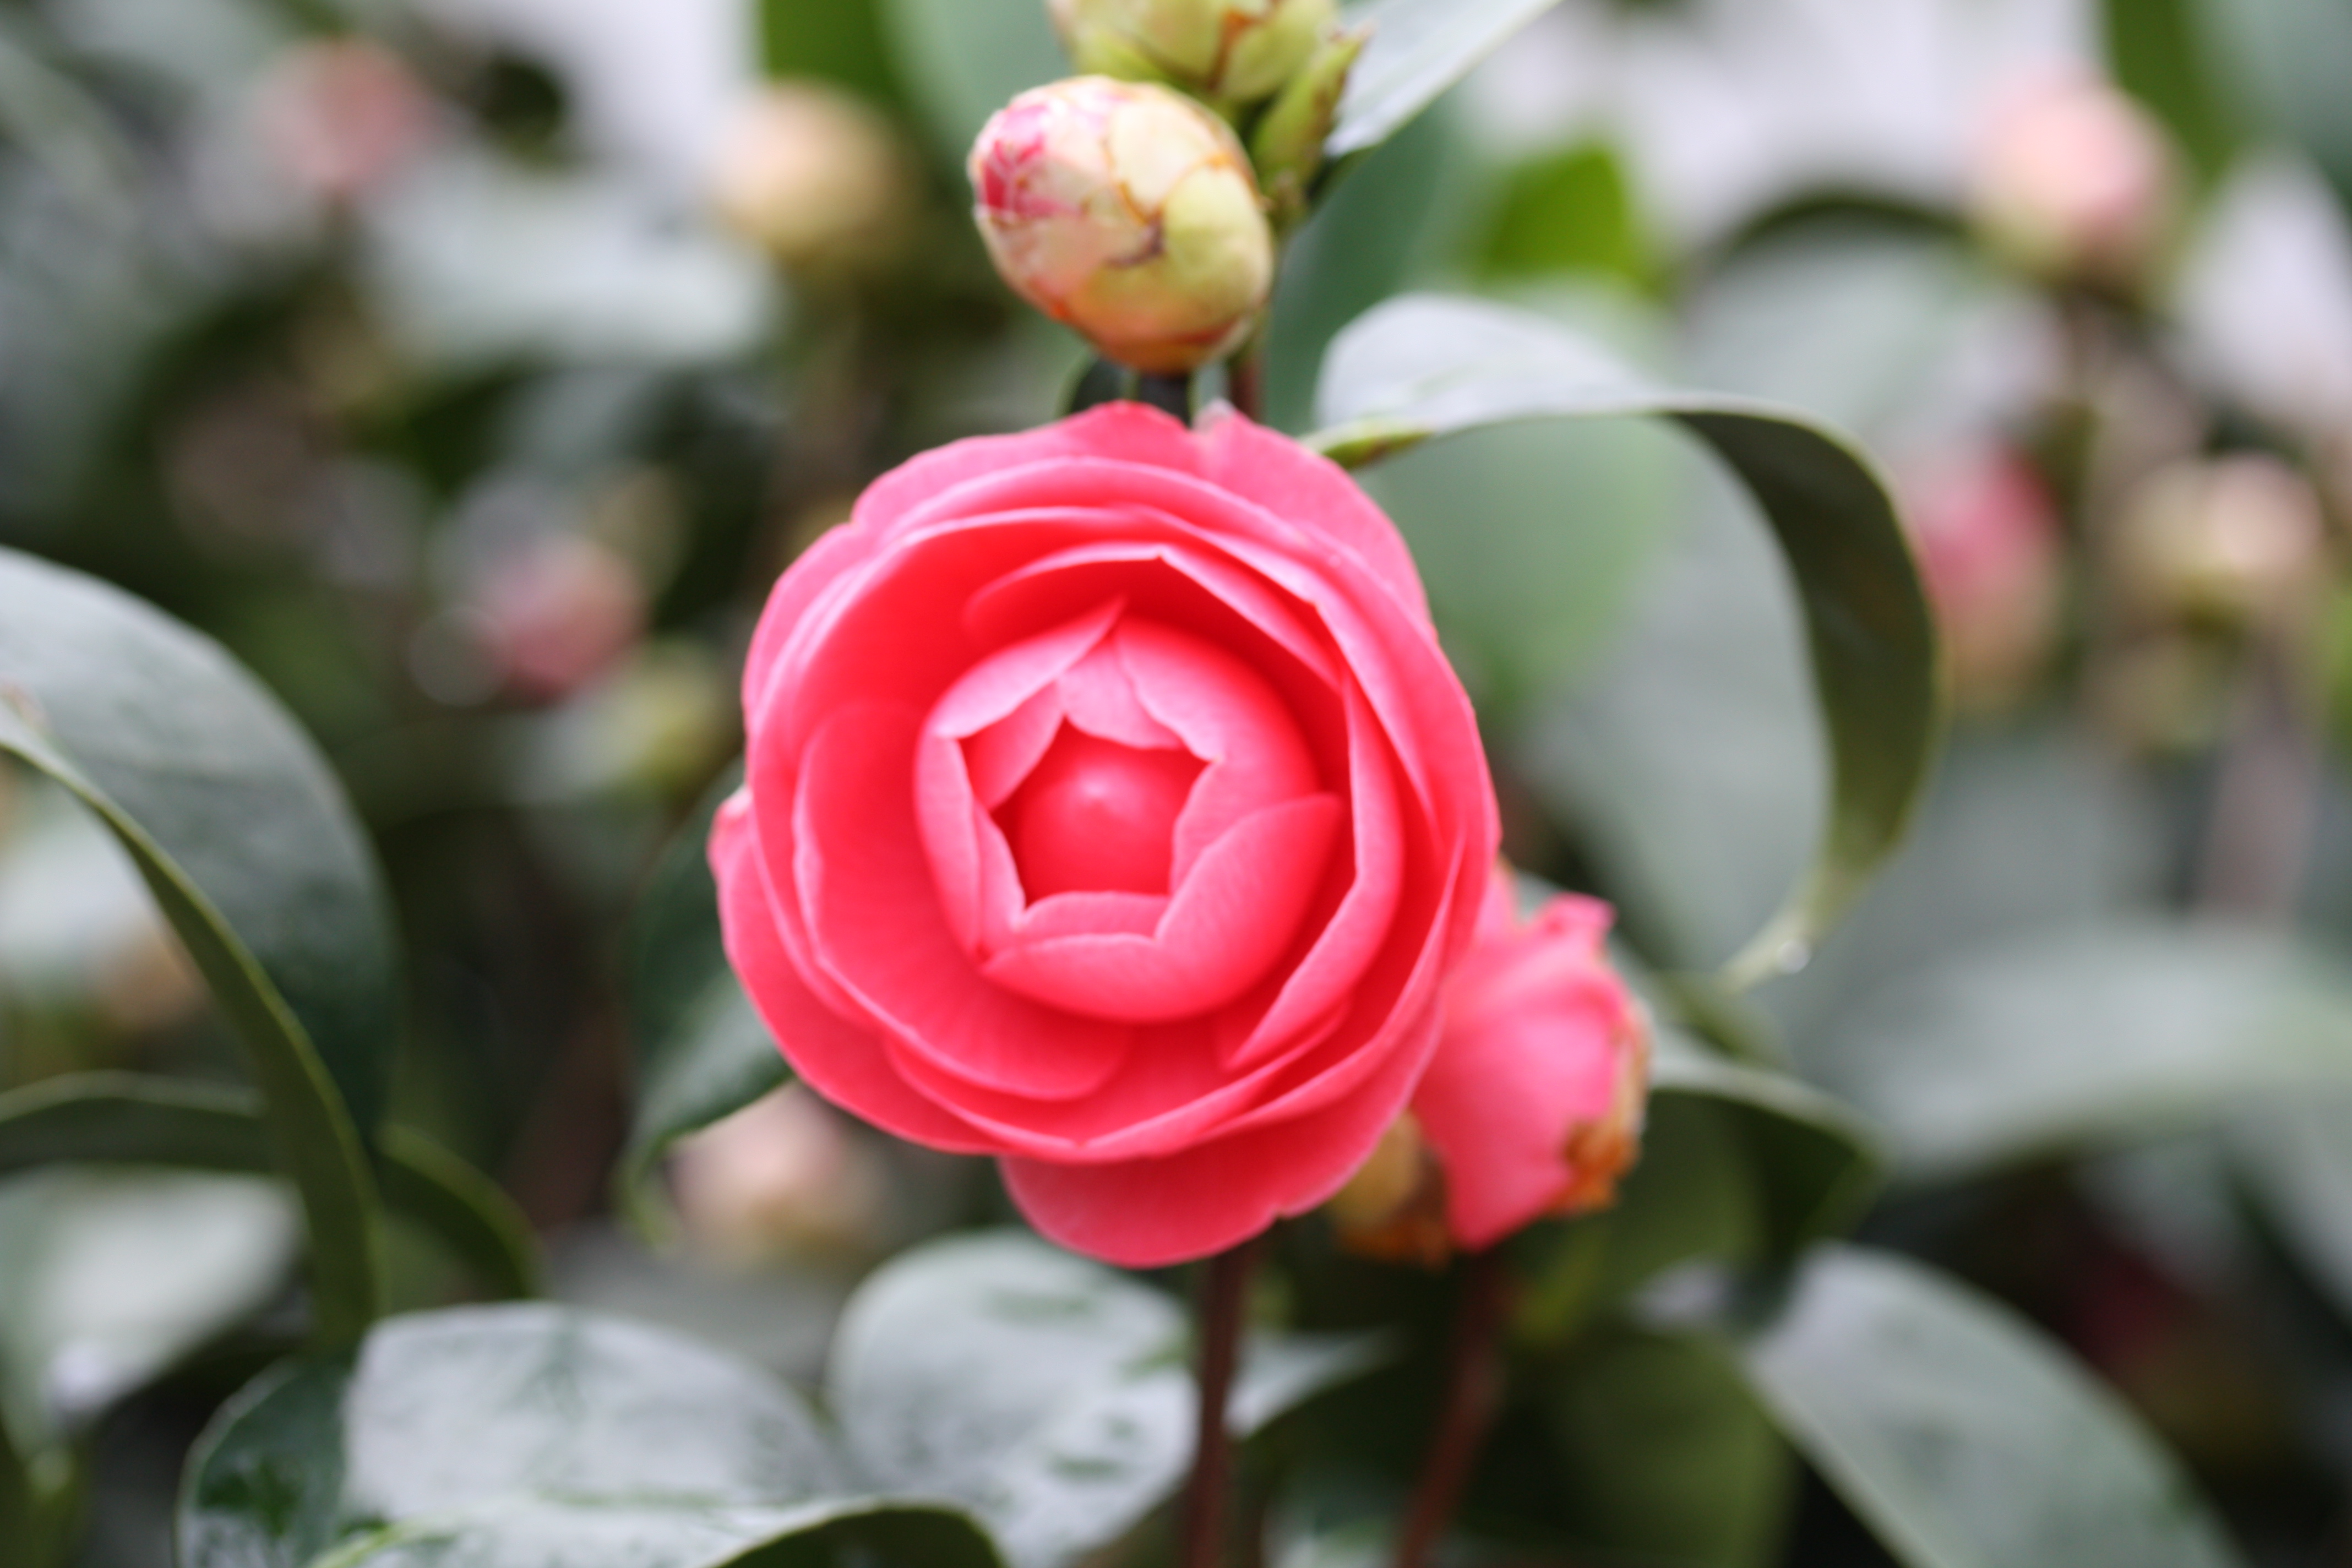 When the camellia is in the air